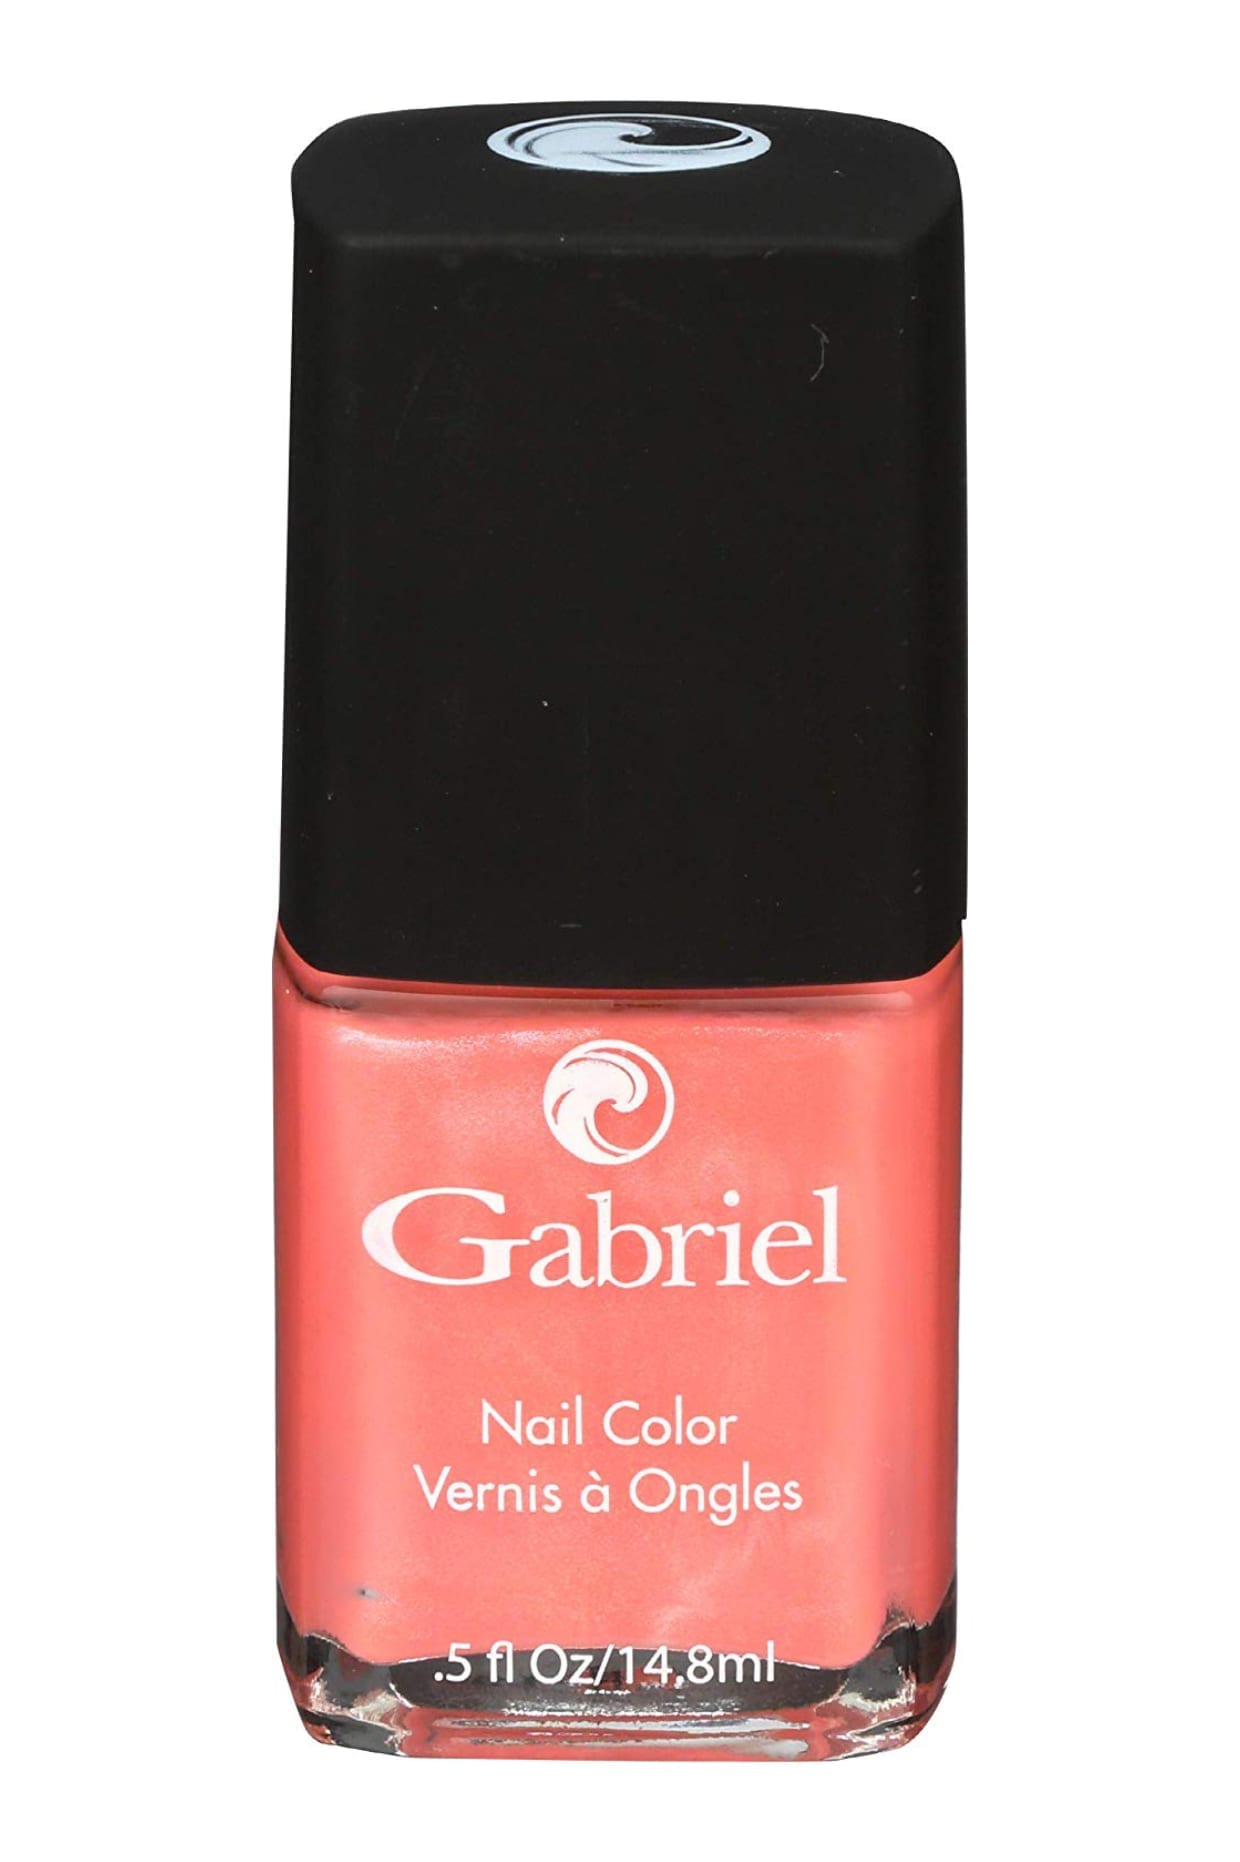 A coral nail polish bottle with a black cap.